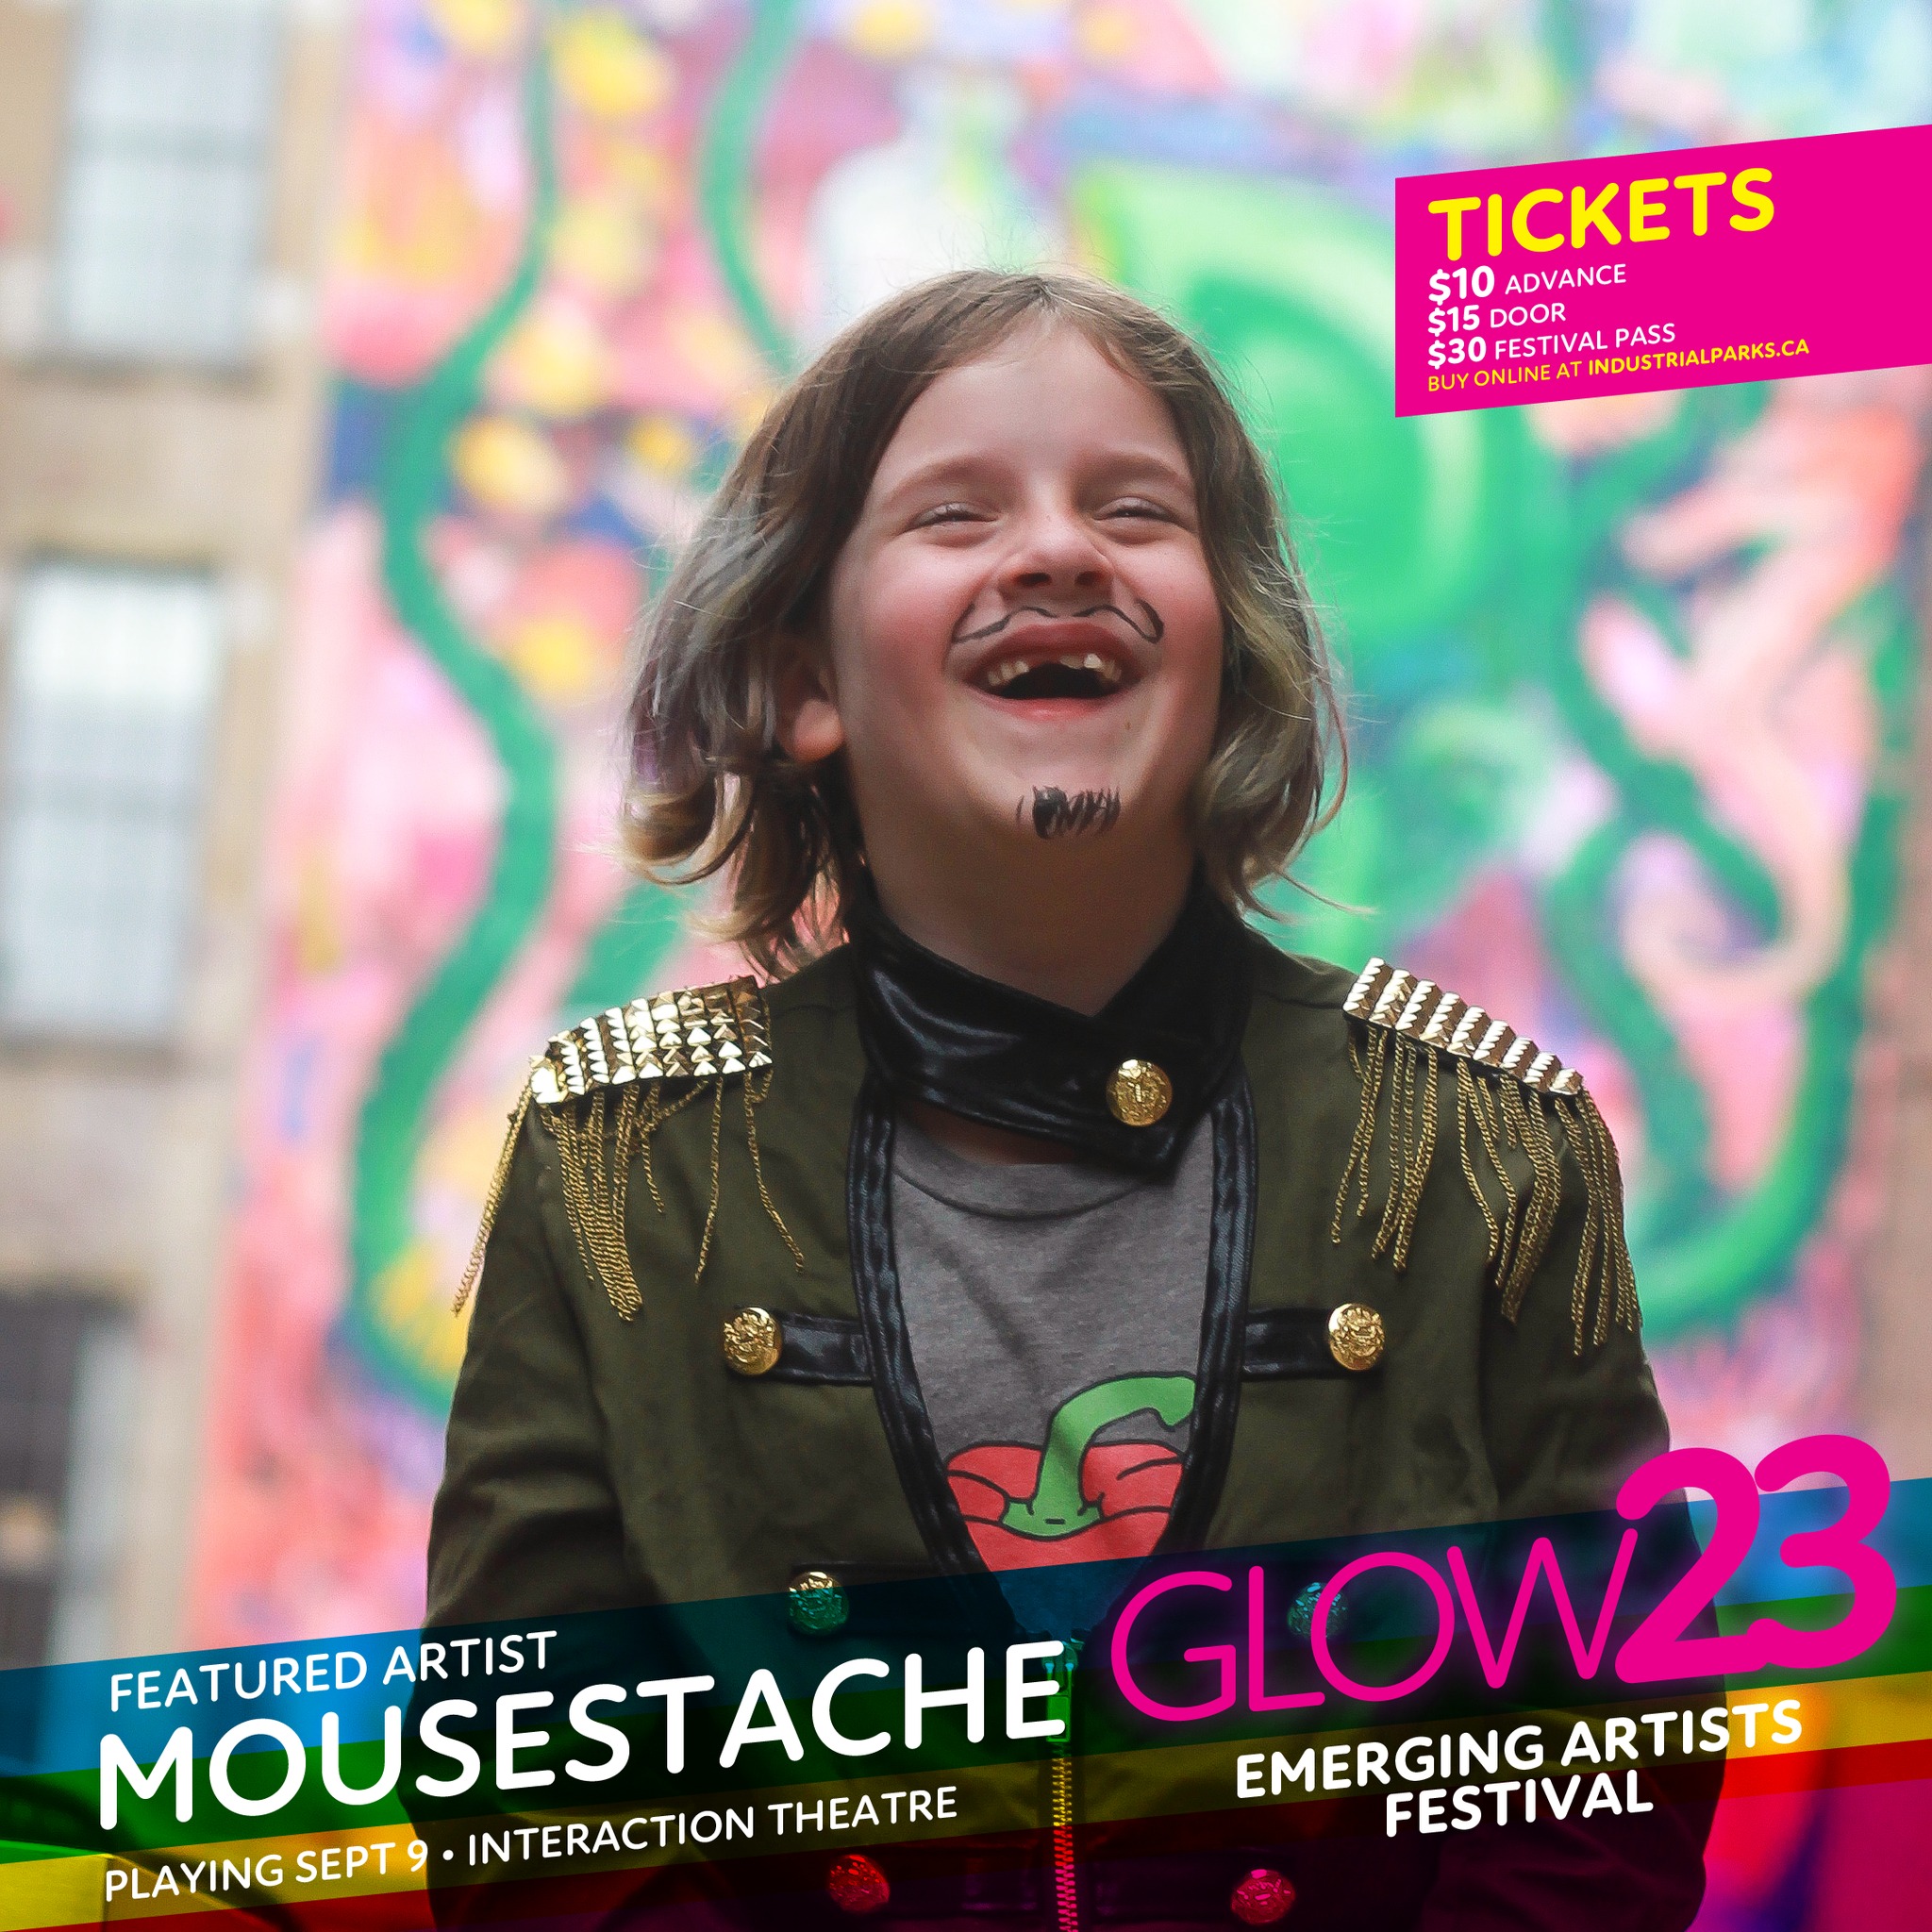 TONIGHT at GLOW Festival 
7:50 PM at Interaction Theatre

MouseStache is a 7-year-old drag king, the youngest drag performer in the Maritimes! 

They love music, dancing, making art and following their drag Haus around the East Coast. You can find MouseStache performing in shows, festivals and events, drag storytimes, eating in local restaurants and giving witty food reviews on Foodie Saint John and around uptown greeting friends (""fans"" as Mouse calls everyone). 

MouseStache's hero and mentor is local drag legend Justin Toodeep, and this small king also lives for everything our queen Dia Monde does.

MouseStache 
@interaction_performingarts 
#GLOW23 

TICKETS (Buy online at industrialparks.ca)
$10 Advance
$15 Door
$30 Festival Pass